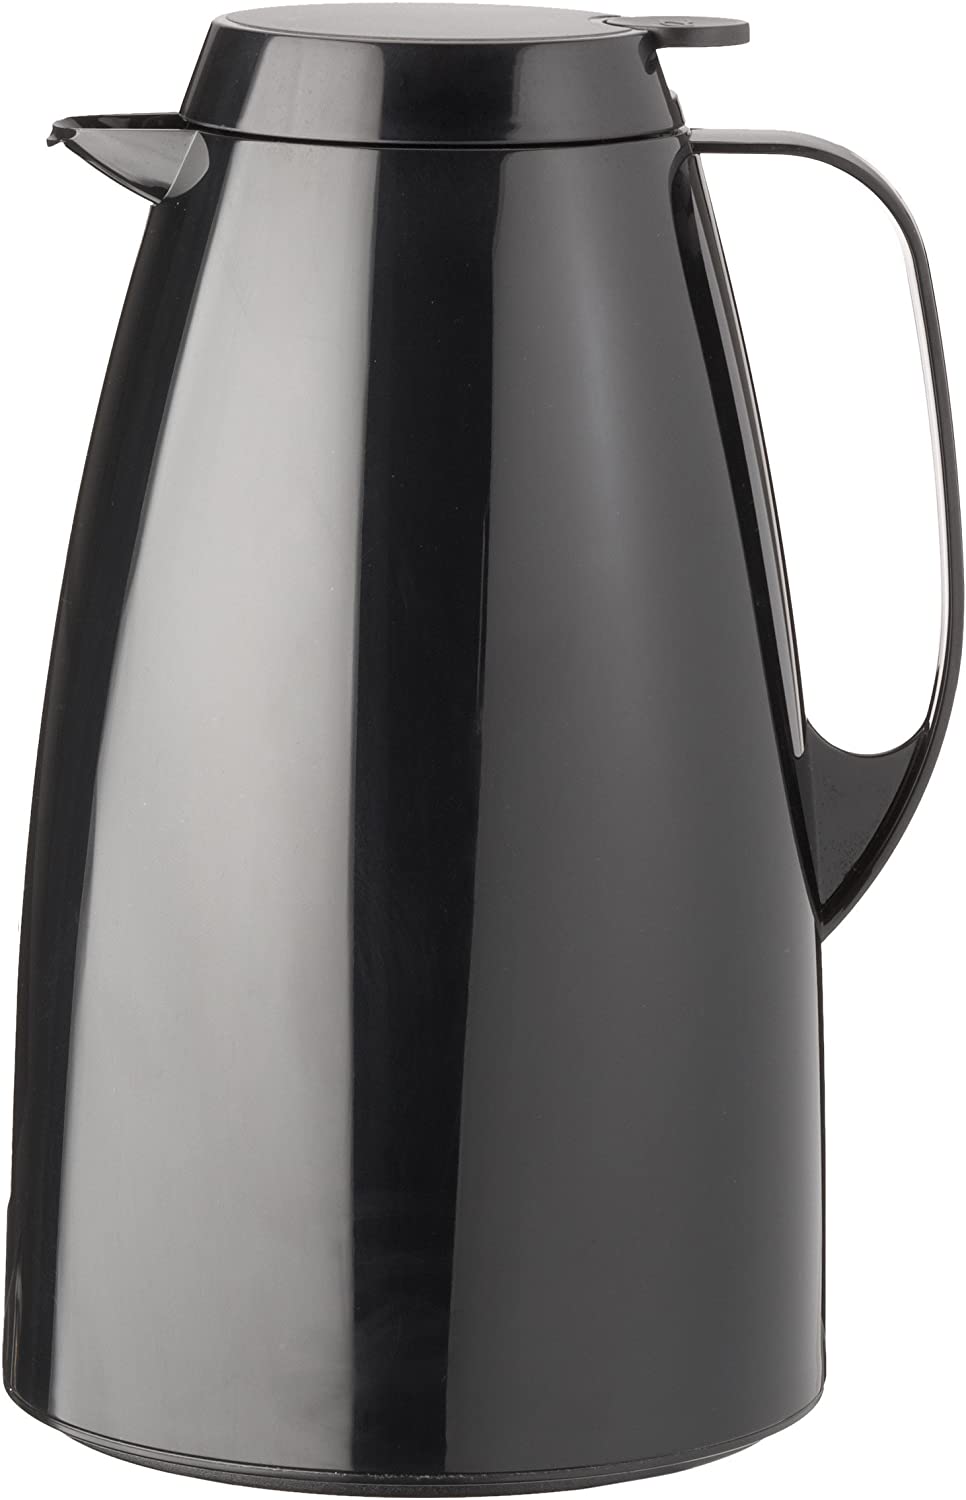 Emsa 505363 thermos flask, thermos flask, 1.5l filling volume, coffee pot, quick tip closure, basic in black